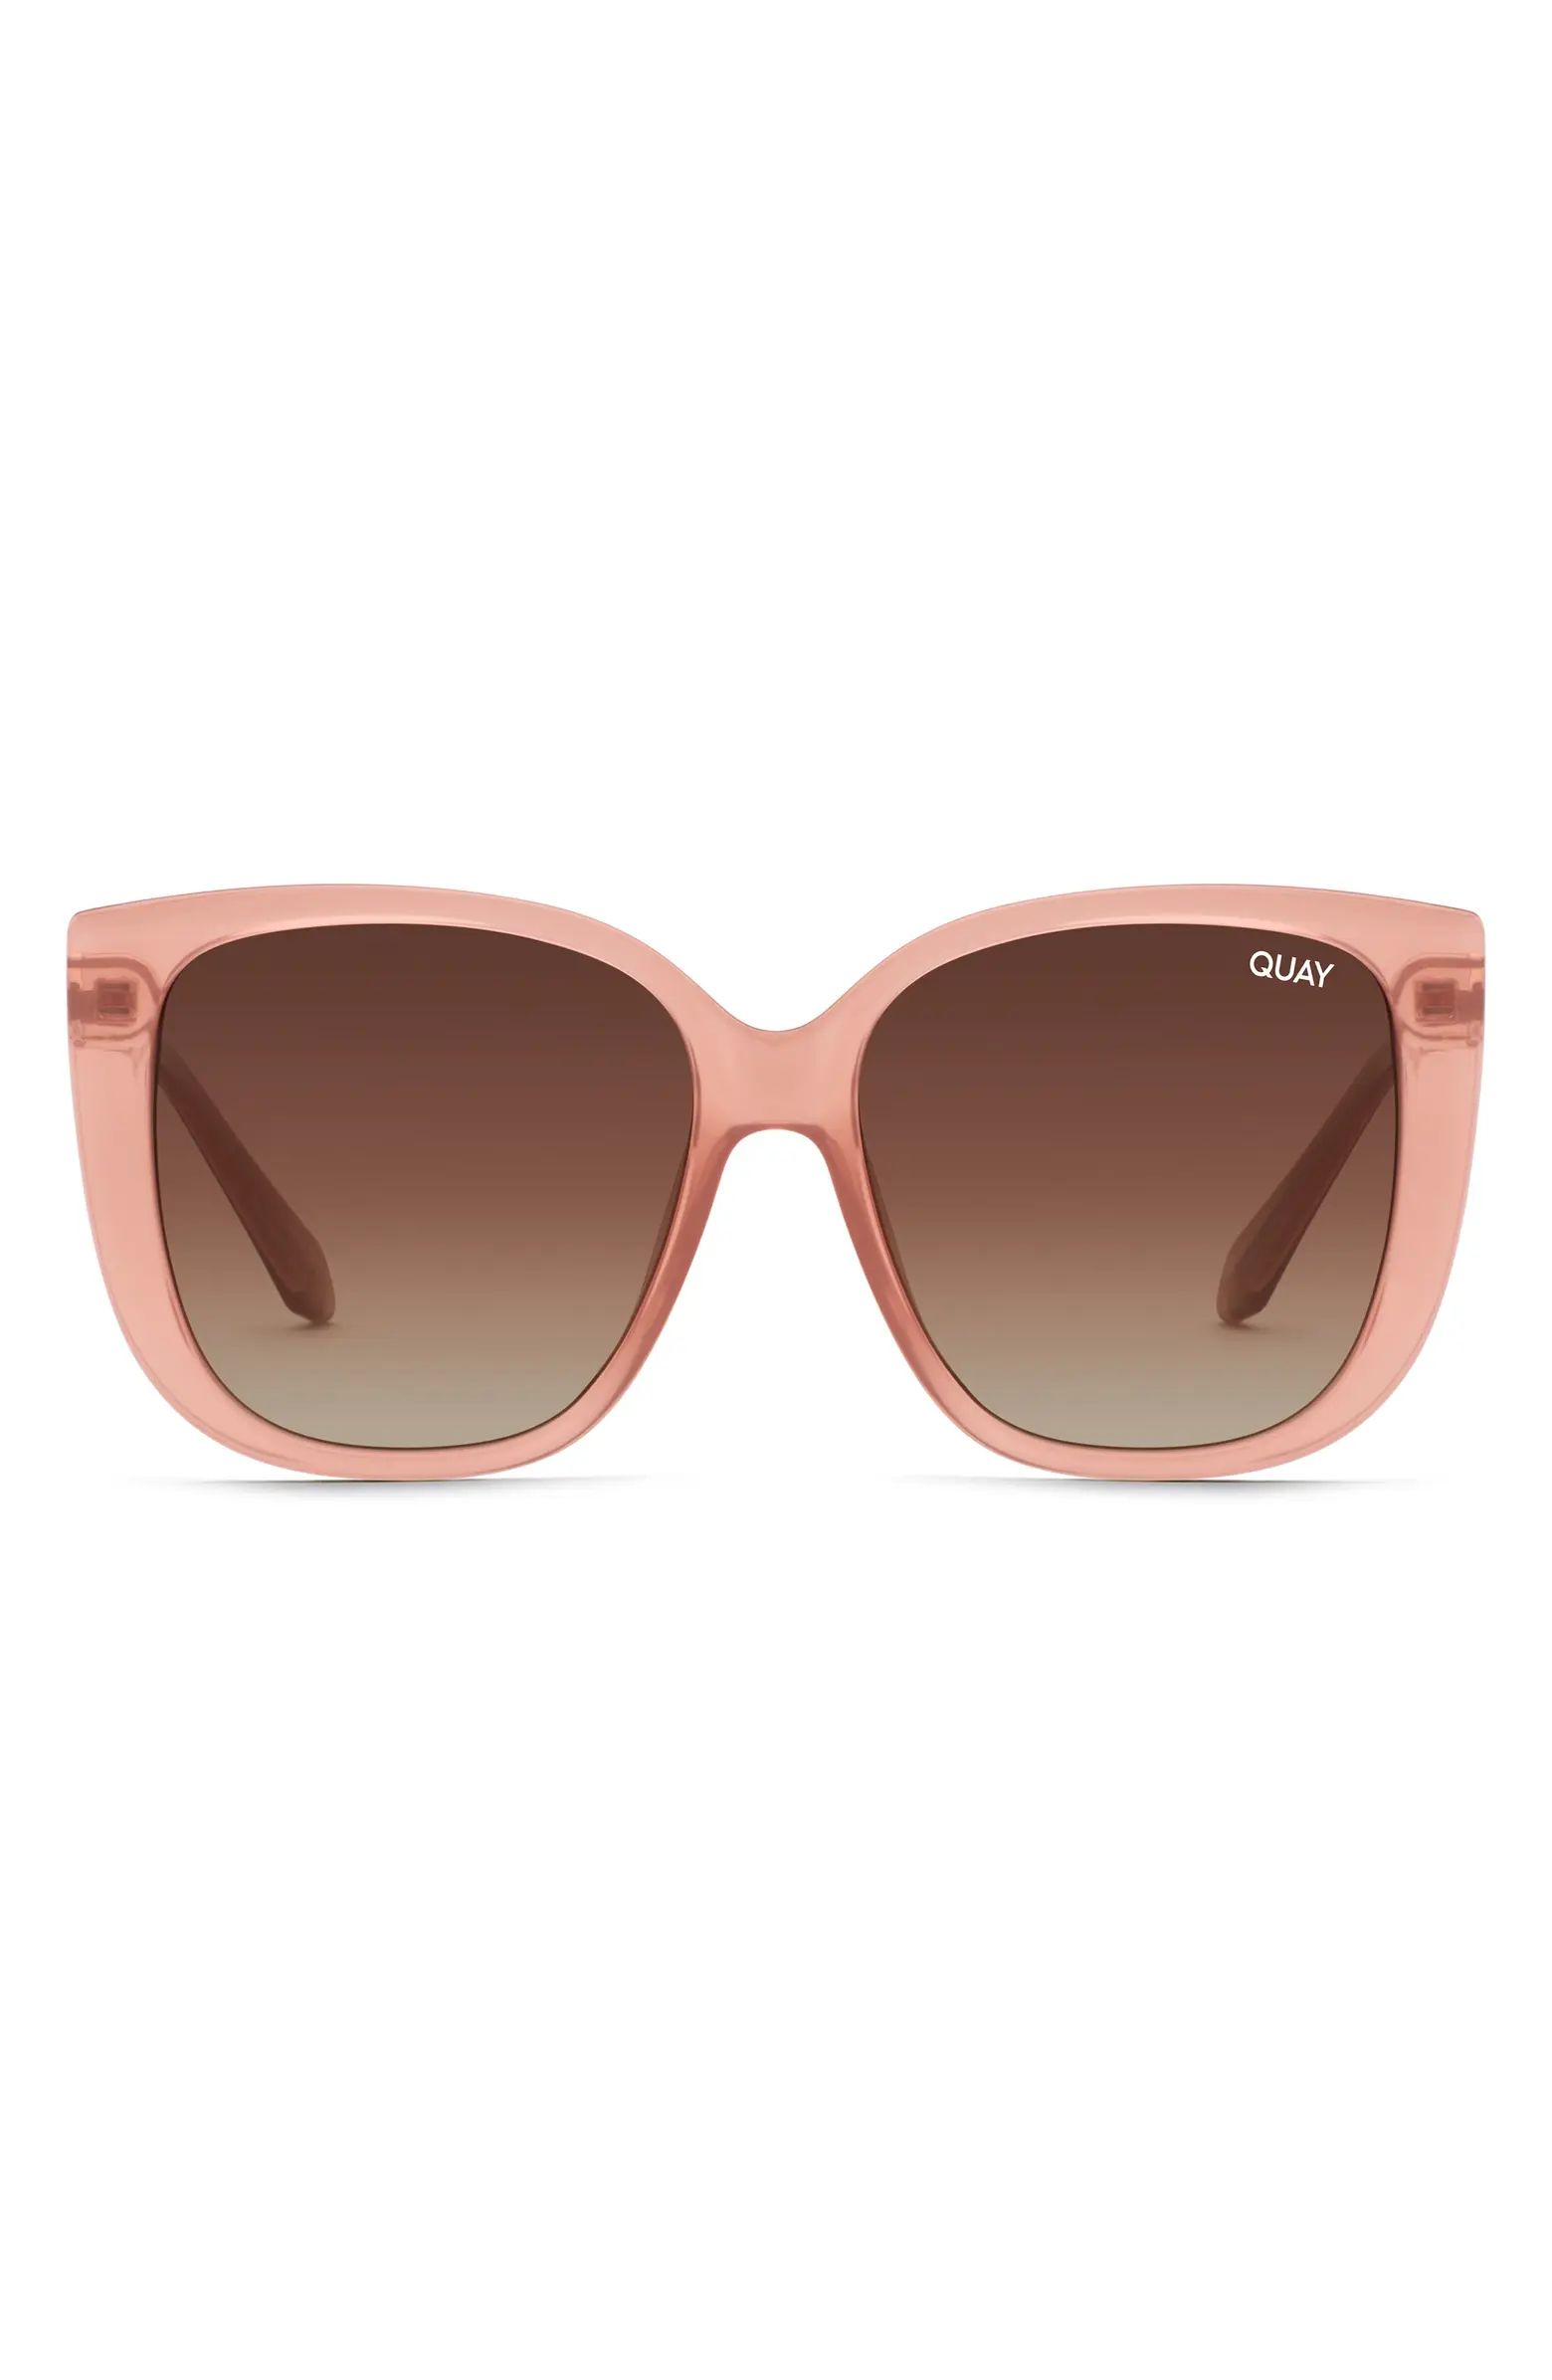 Quay Australia Ever After 54mm Polarized Gradient Square Sunglasses | Nordstrom | Nordstrom